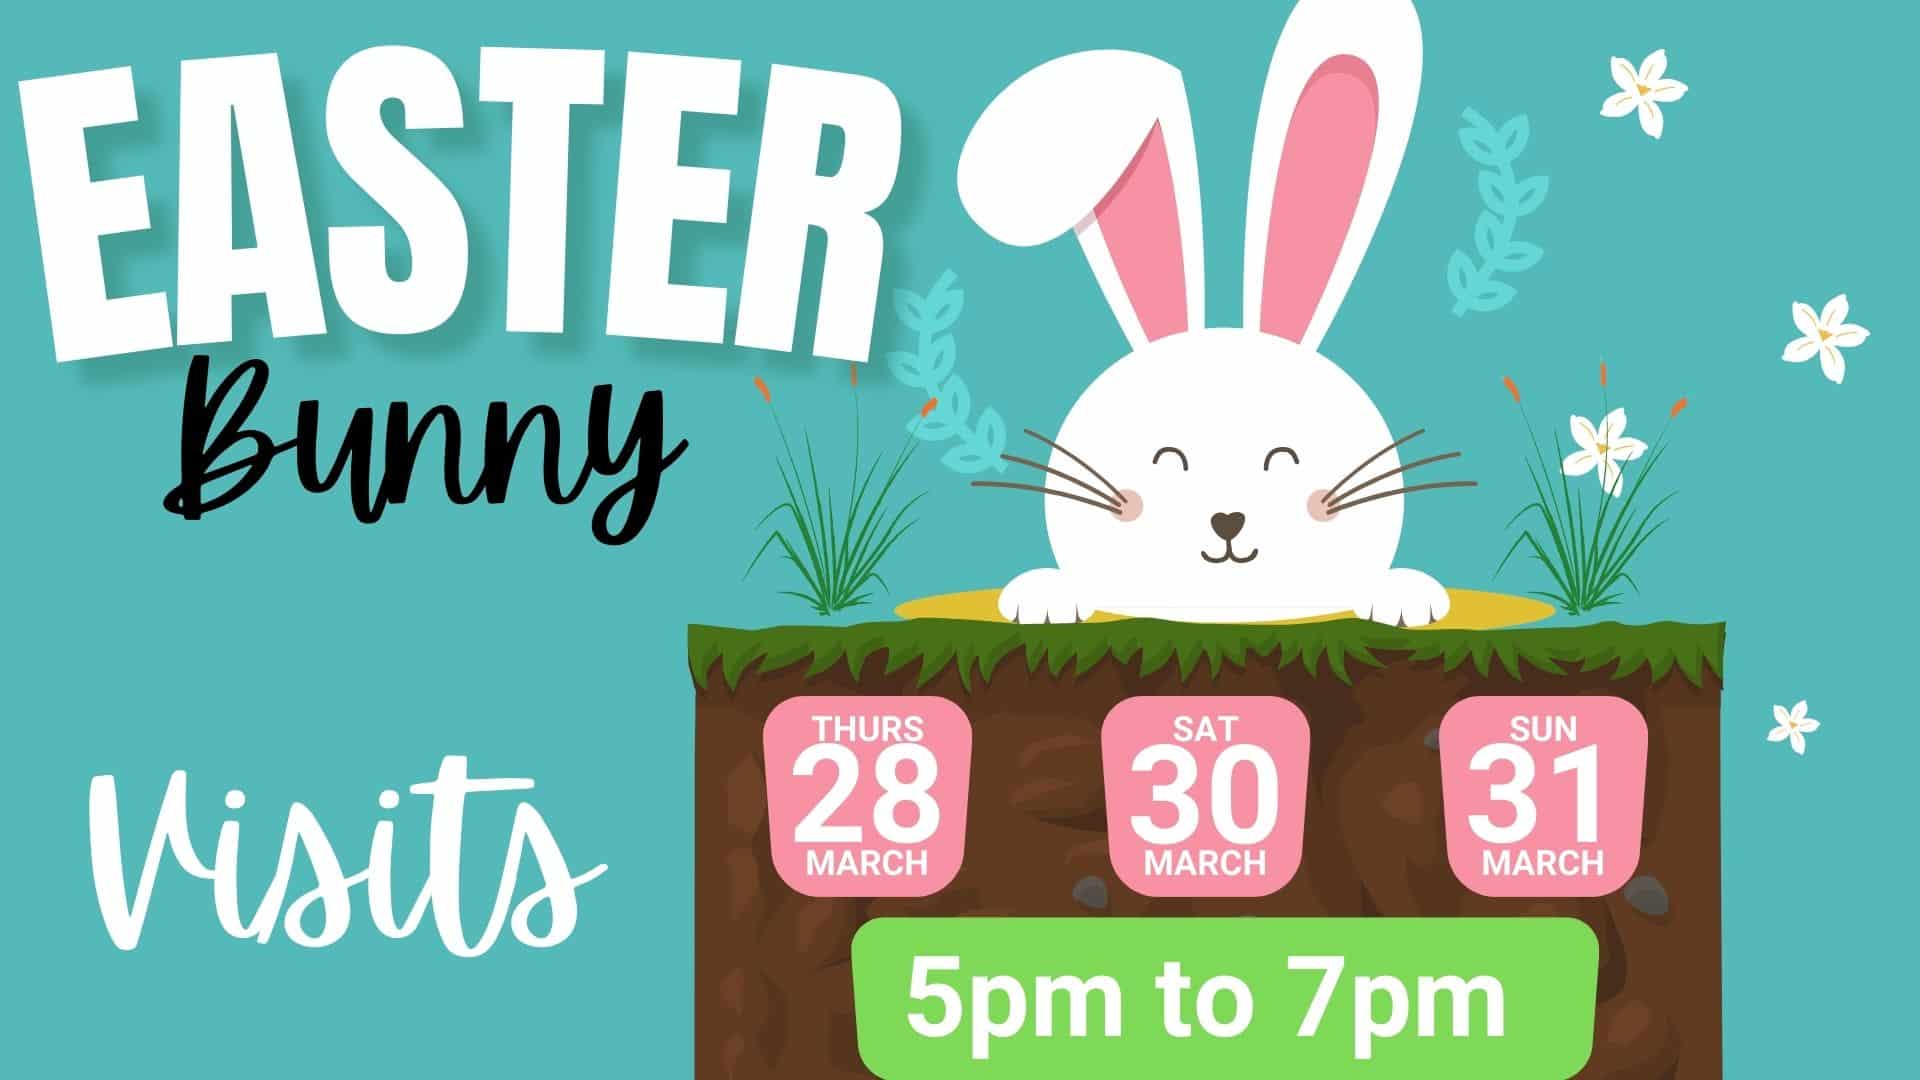 Easter Bunny @ Nambour Rsl Club (1920 X 1080 Px)